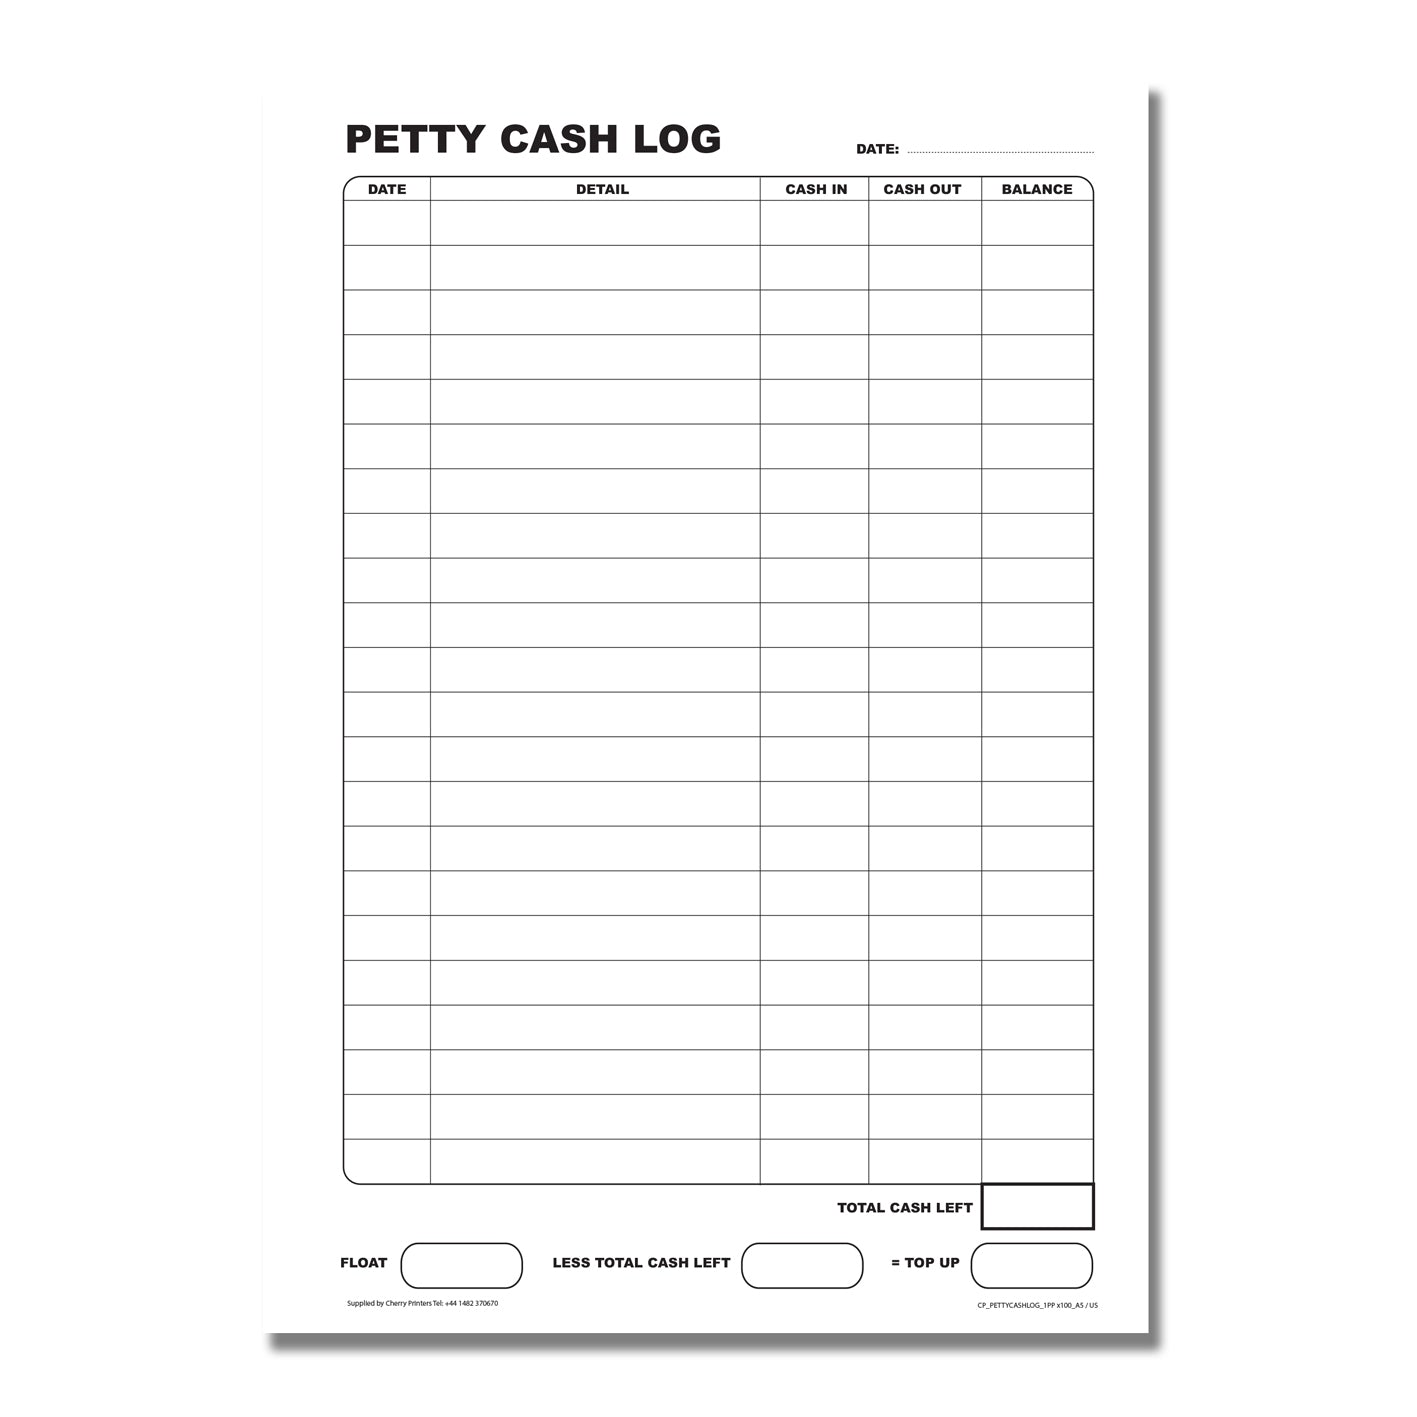 Petty Cash Log Book | 100 pages | 80gsm Paper | A5 - 5.8" x 8.3" | BOX OF 40 BOOKS